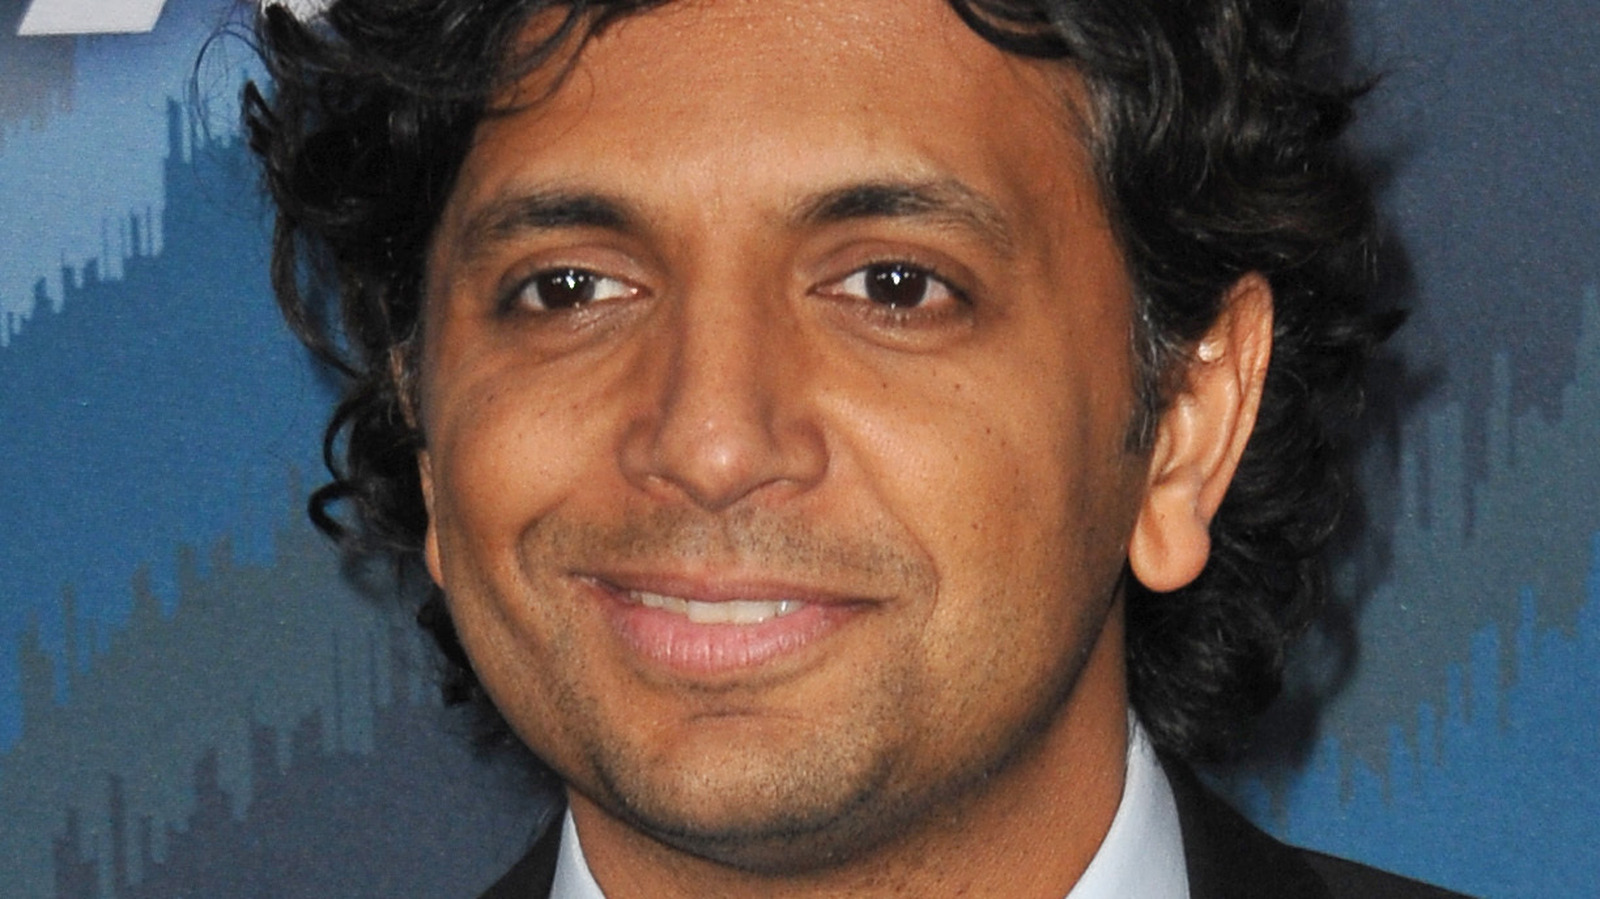 M. Night Shyamalan Used An Extreme Method To Pull Off That Iconic